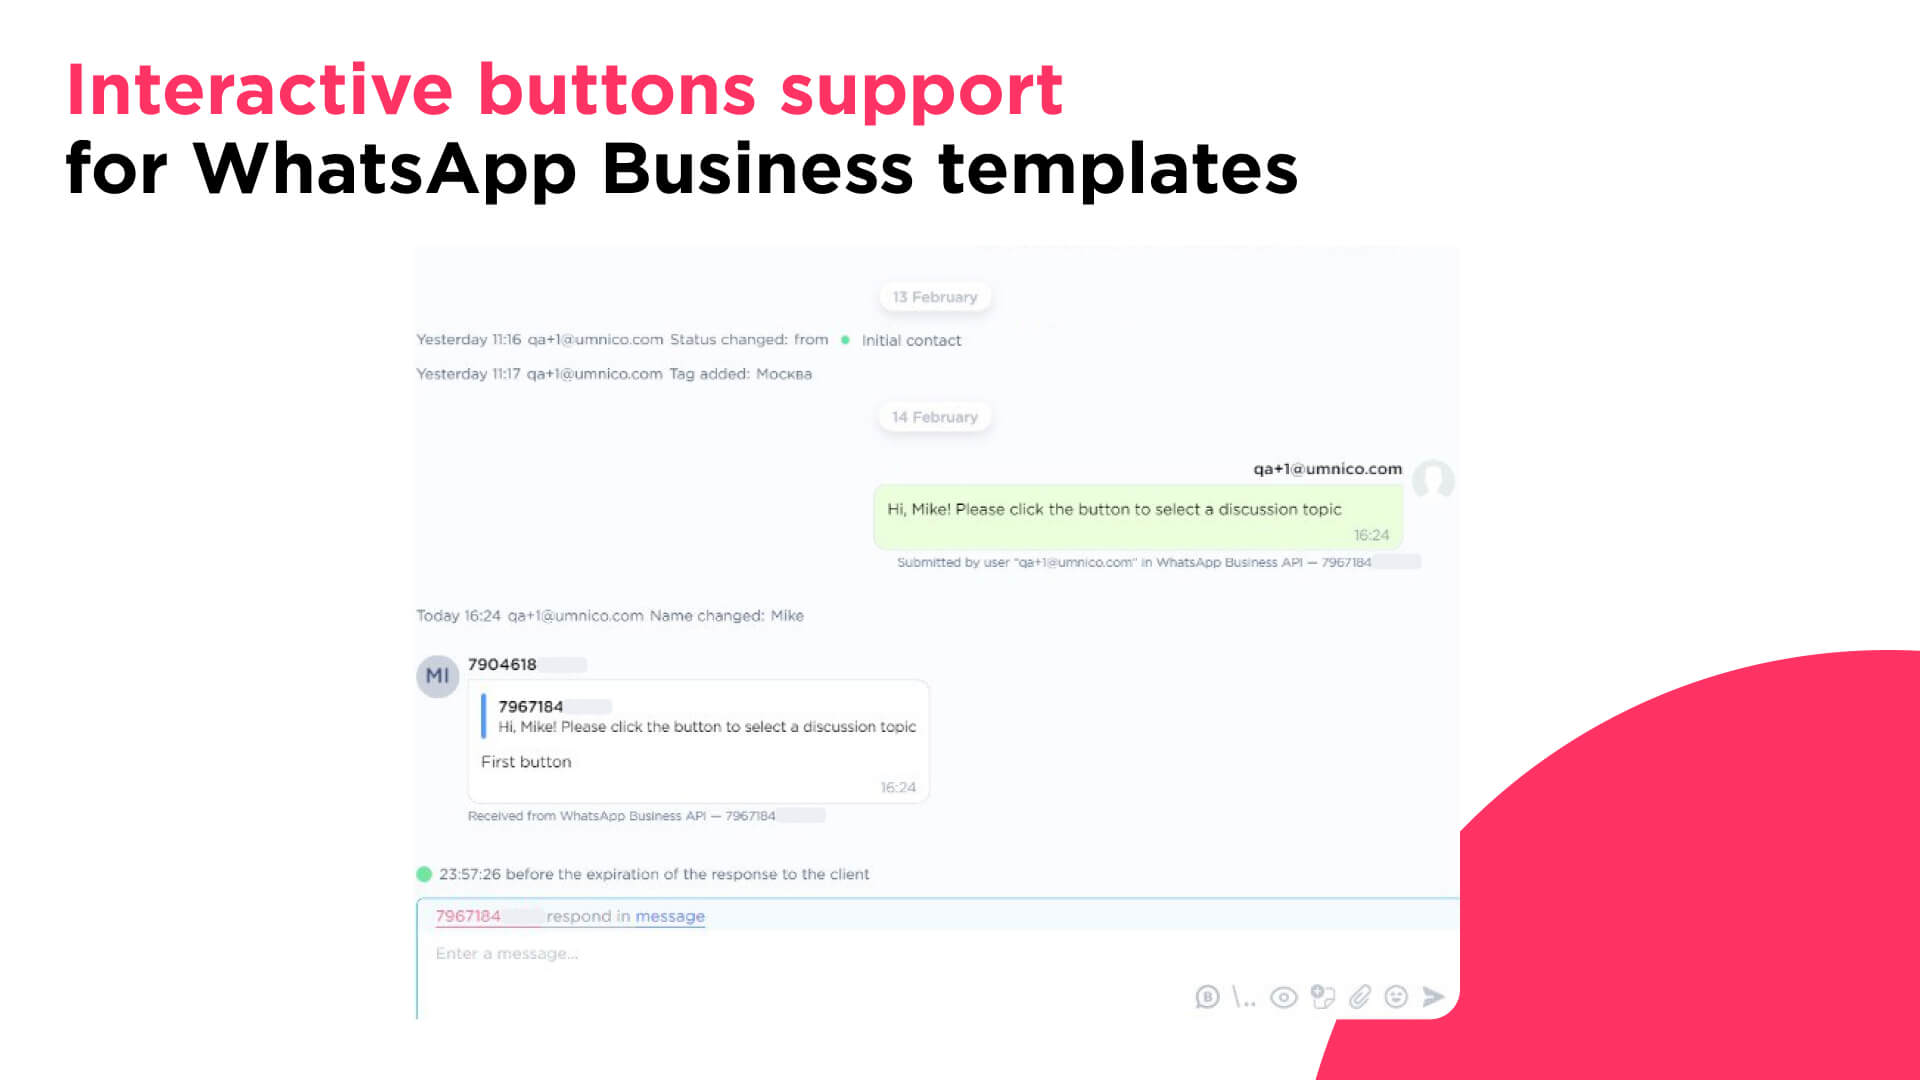 Interactive buttons support for WhatsApp Business templates